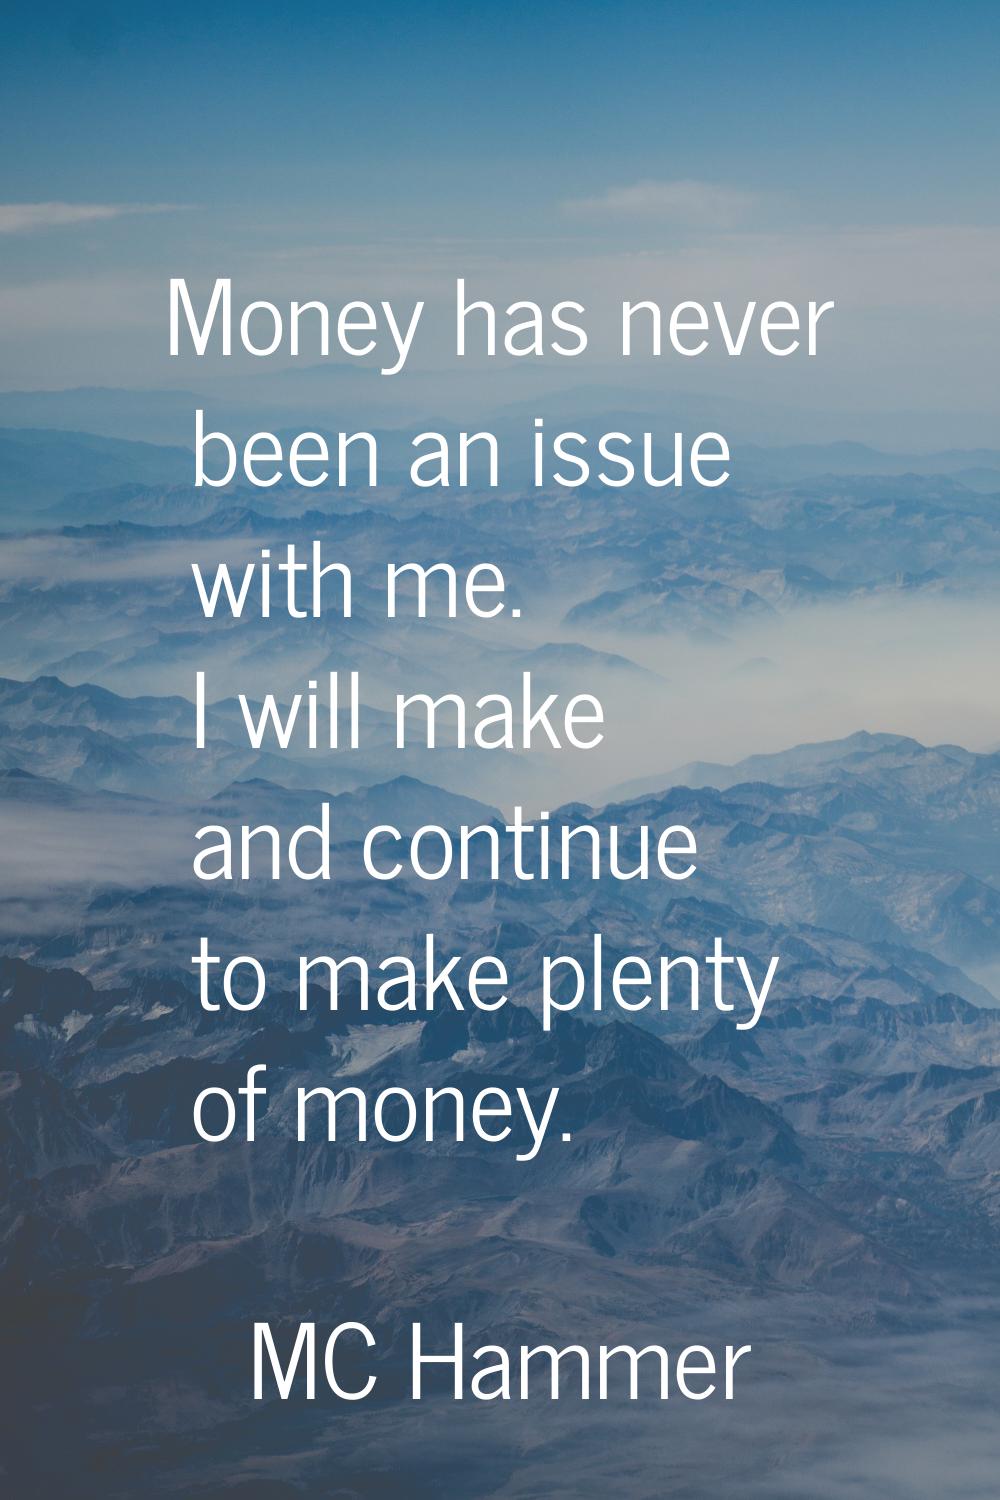 Money has never been an issue with me. I will make and continue to make plenty of money.